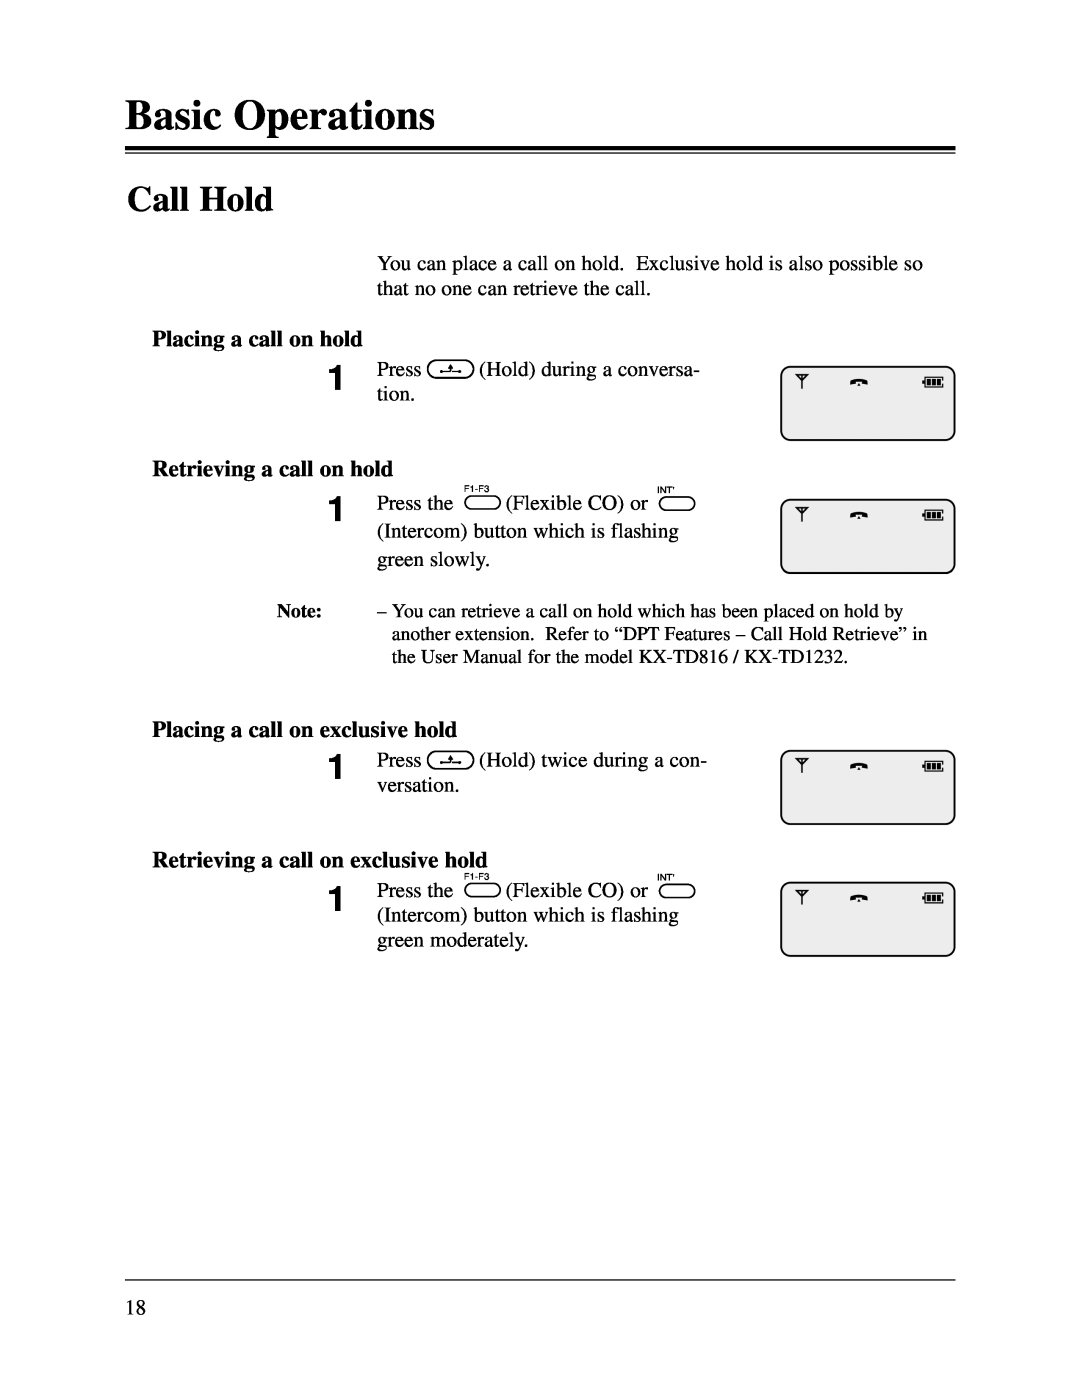 Panasonic KX-TD1232CE Call Hold, Placing a call on hold, Retrieving a call on hold, Placing a call on exclusive hold 